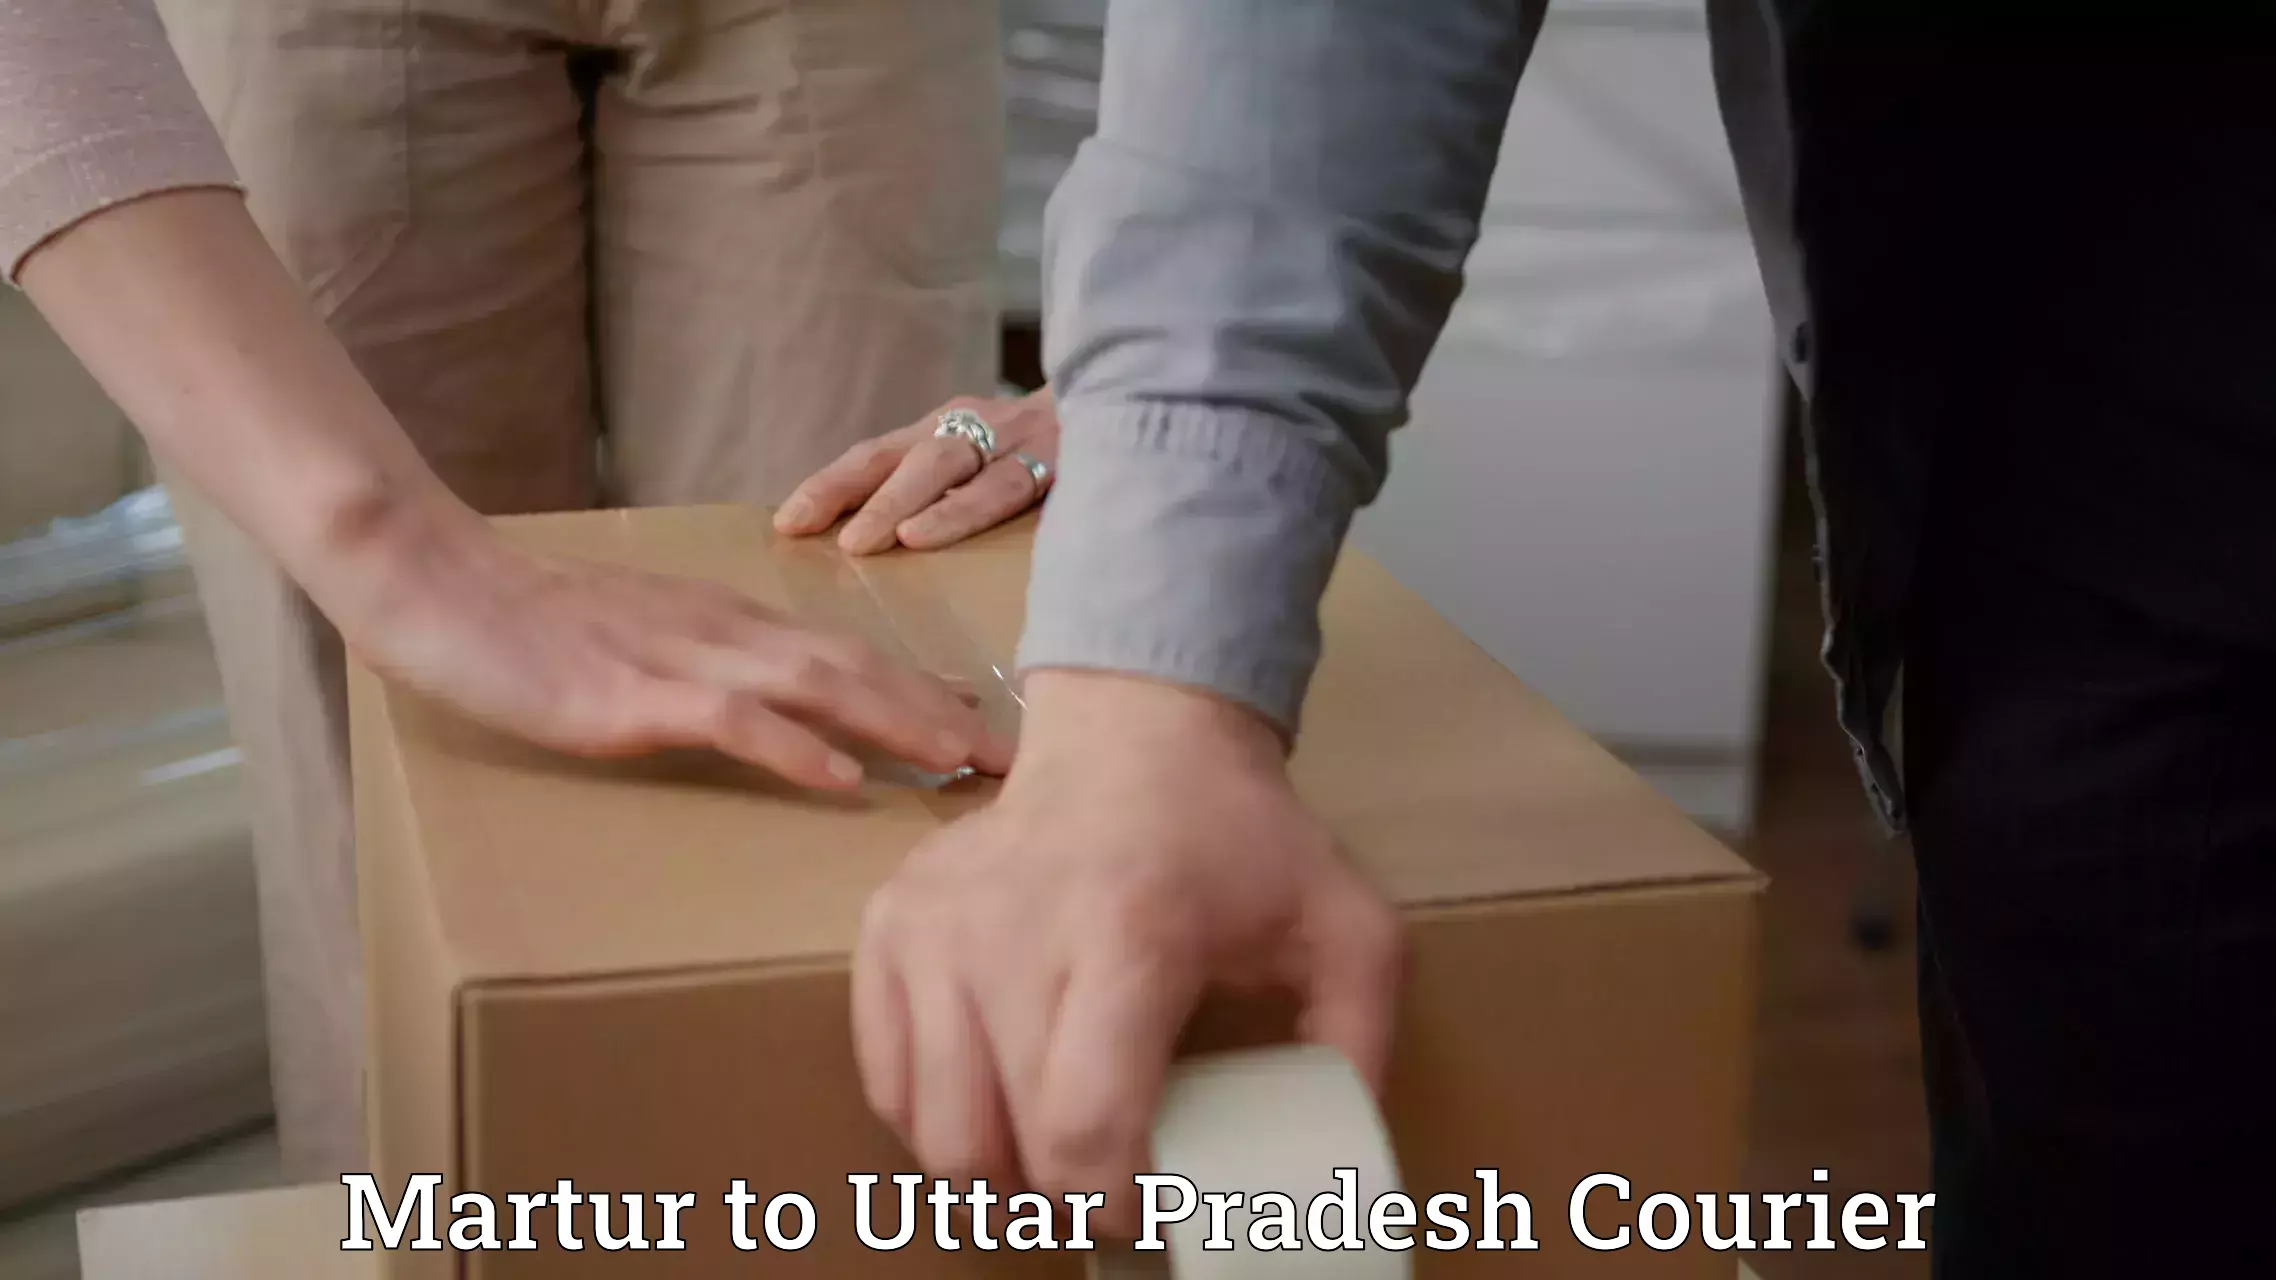 Courier service efficiency Martur to Kaushambi